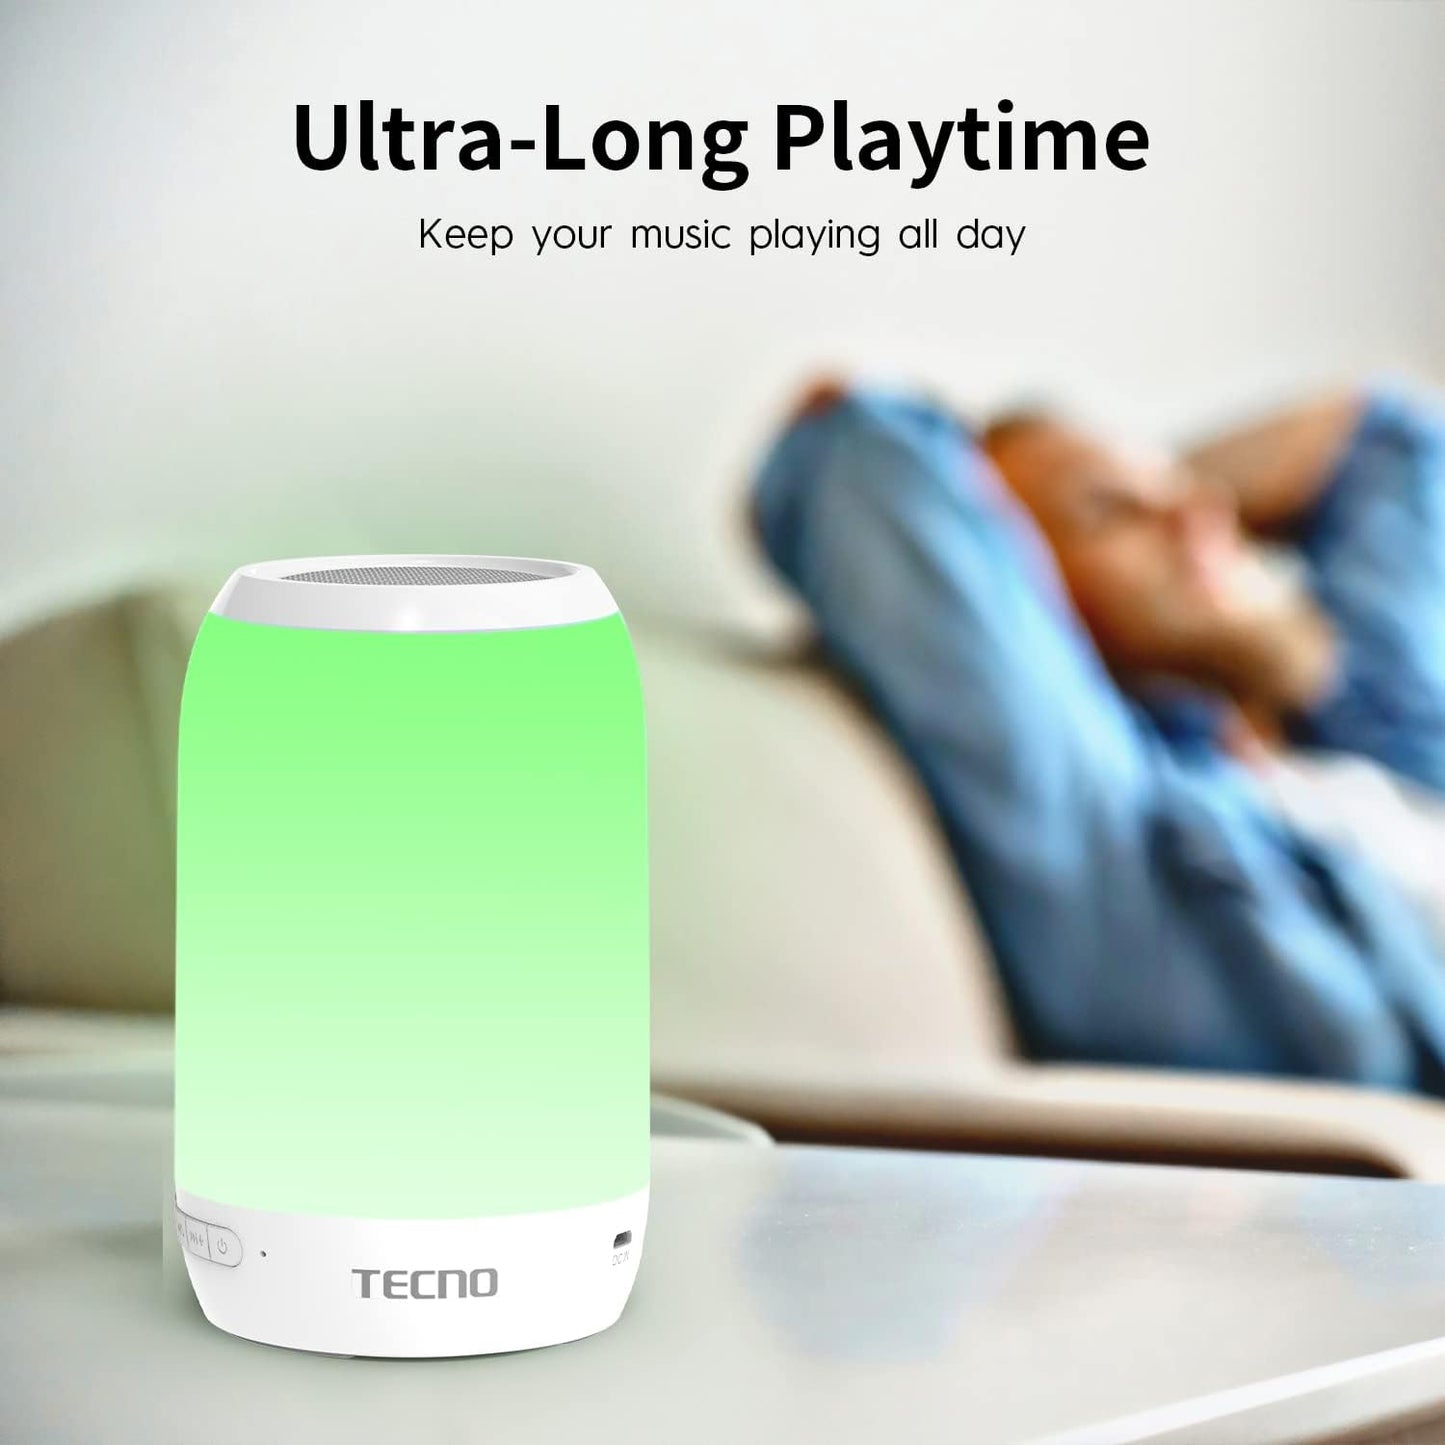 Tecno Portable Night Light Bluetooth Speakers with Microphone, RGB Table Lamp, Speaker Bluetooth Wireless with Music LED Bedside Lamp with Dimmable Warm White, 7 Colors 3 Modes Portable